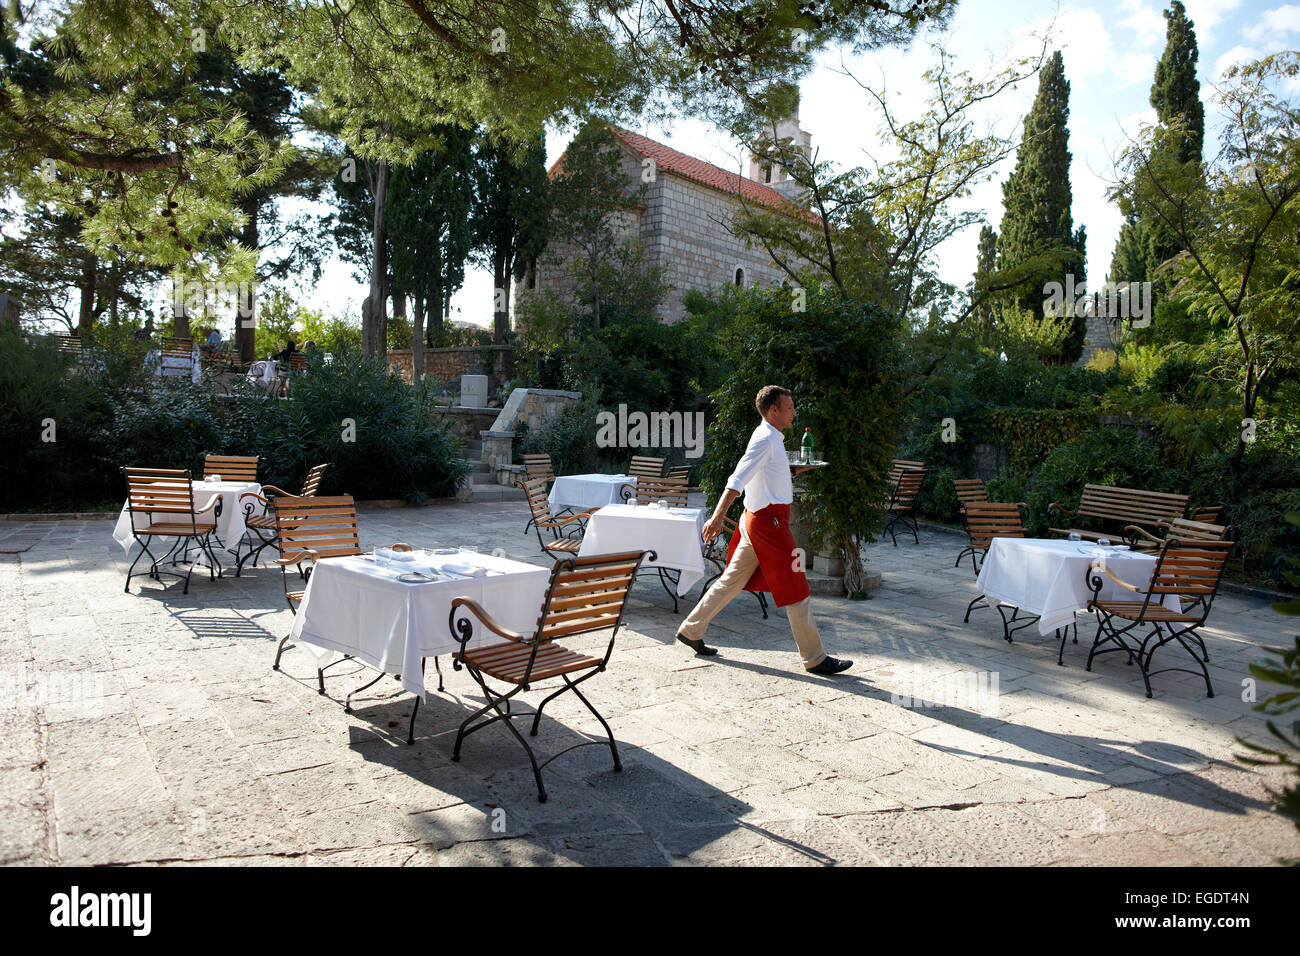 Waiter and coffee tables on the Piazza under trees, Aman Sveti Stefan, Sveti Stefan, Montenegro Stock Photo